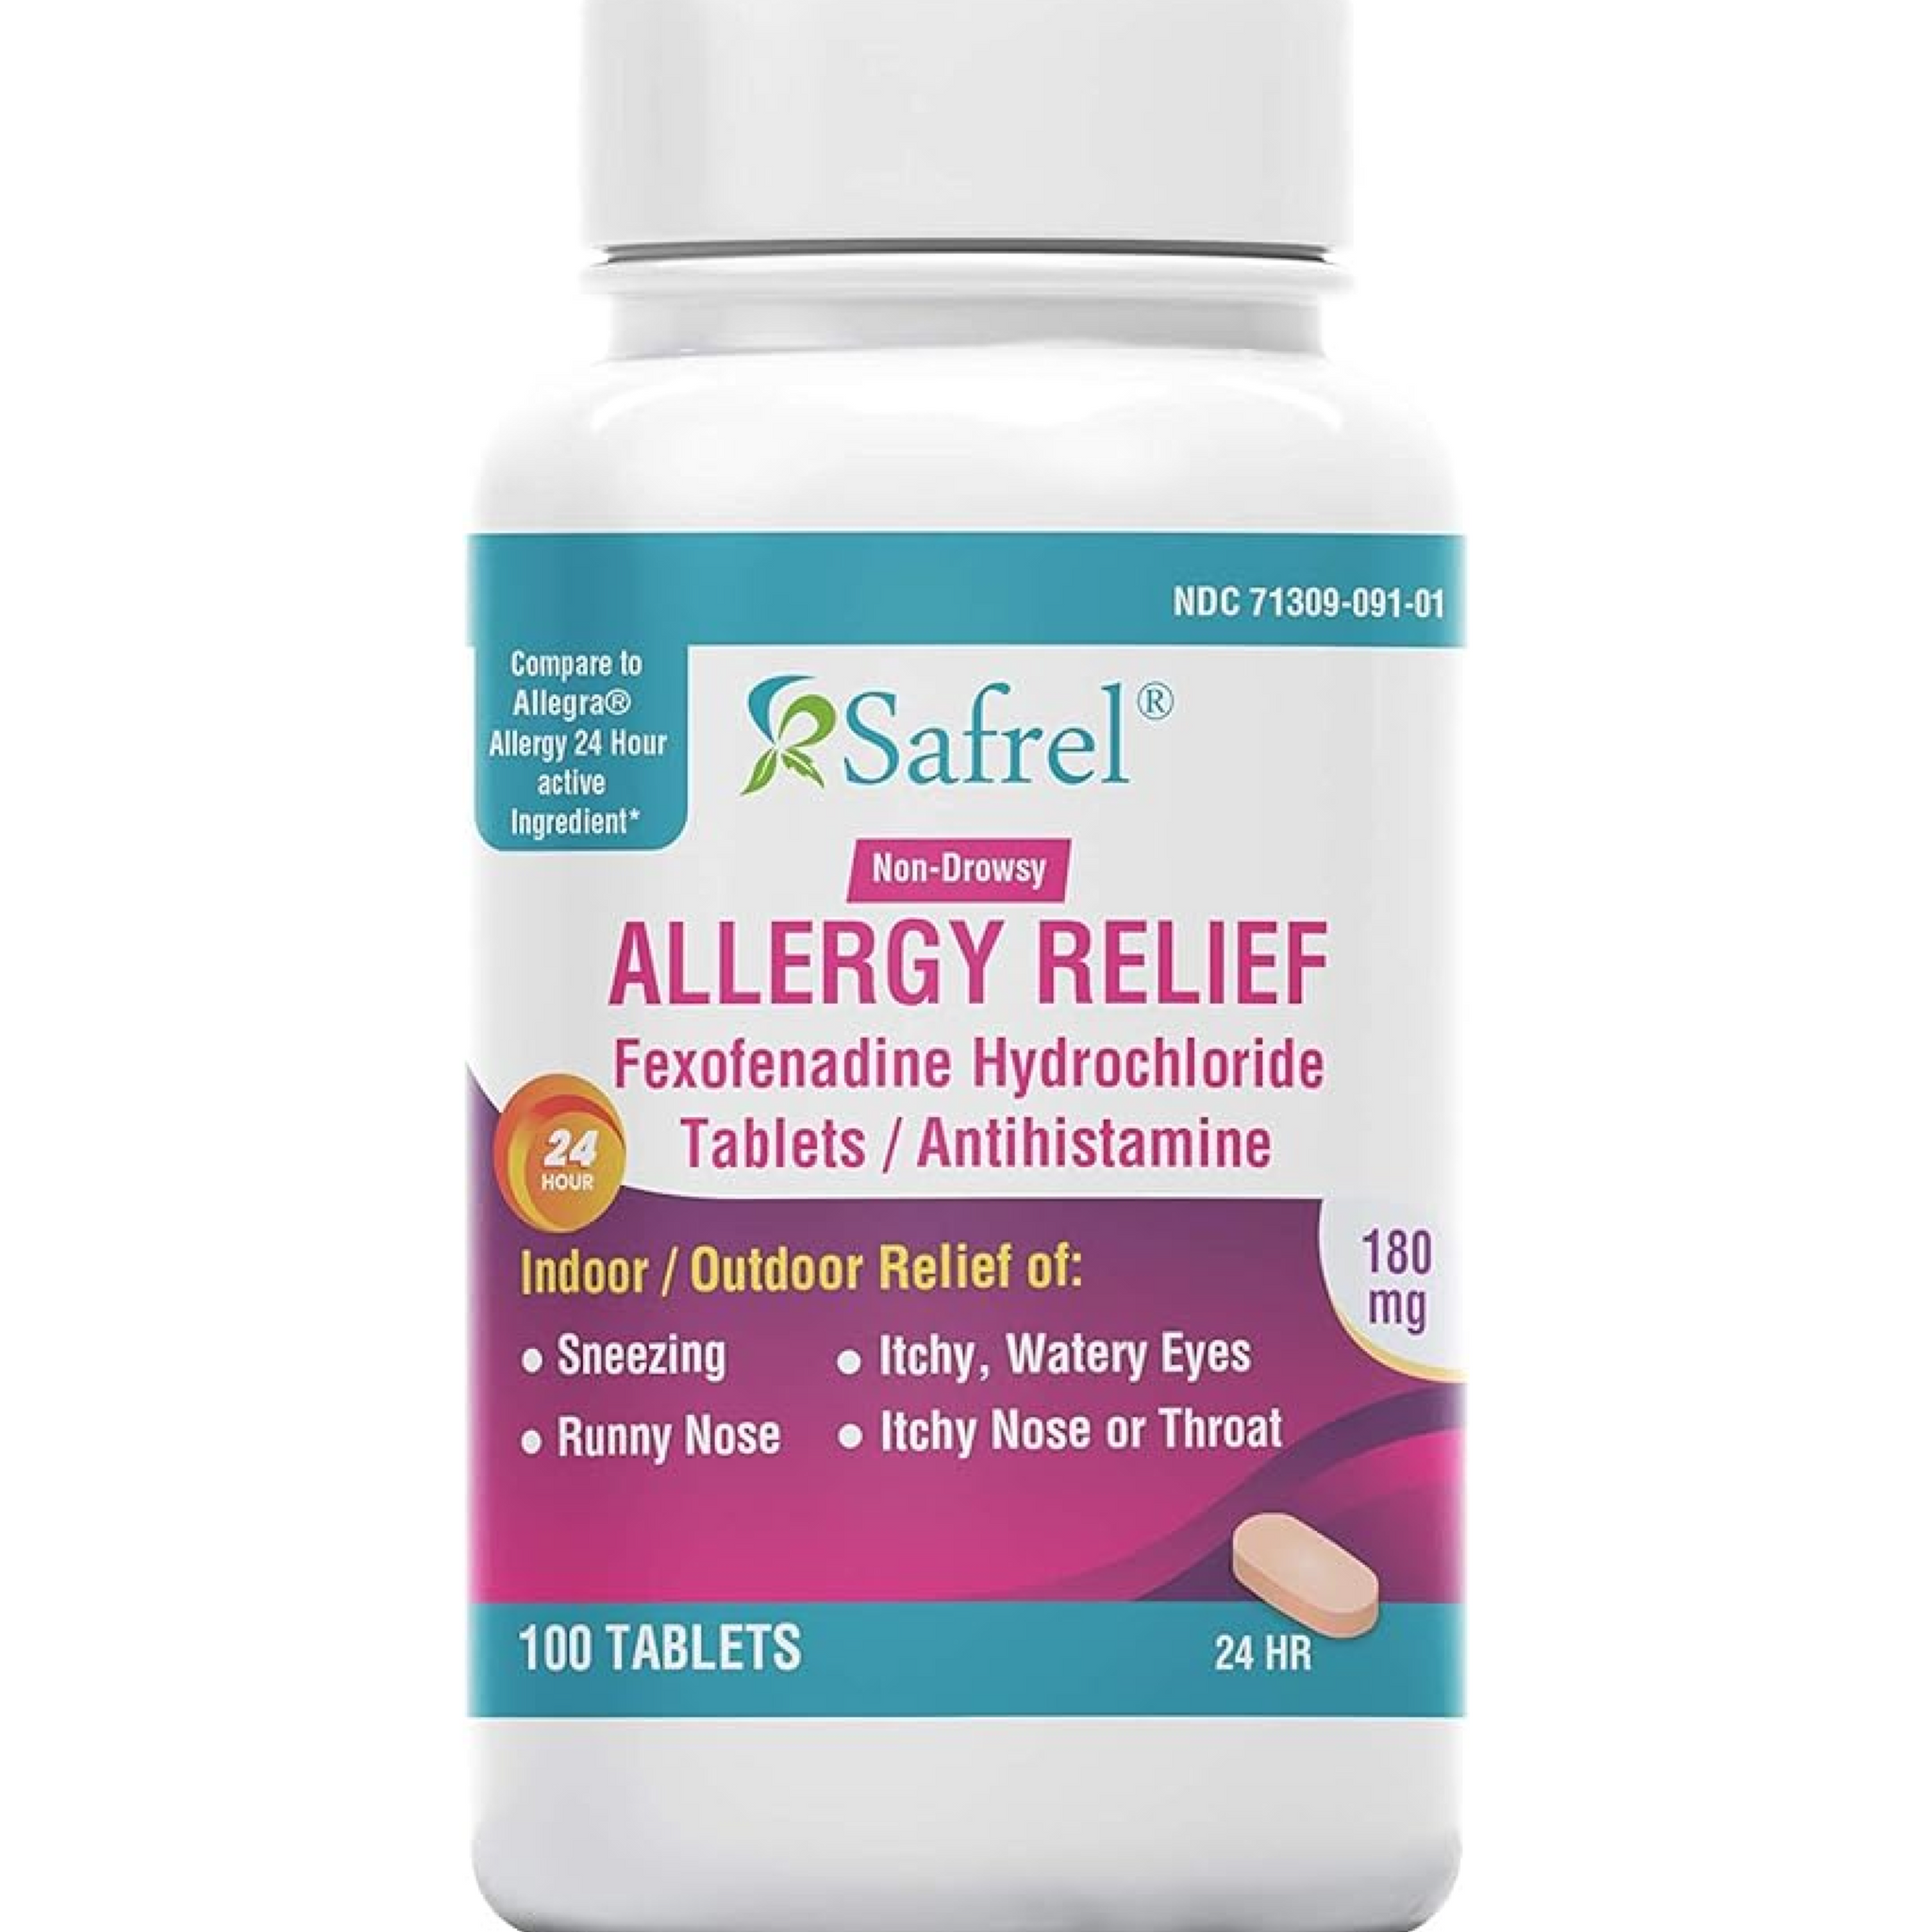 Safrel 24 Hour Allergy Relief Medicine (100-Count) | Fexofenadine HCl 180 mg Tablets |Non-Drowsy Antihistamine | For Hay Fever, Itchy Eyes, Nose, Throat |Children and Adults | Compare to Allegra Pills